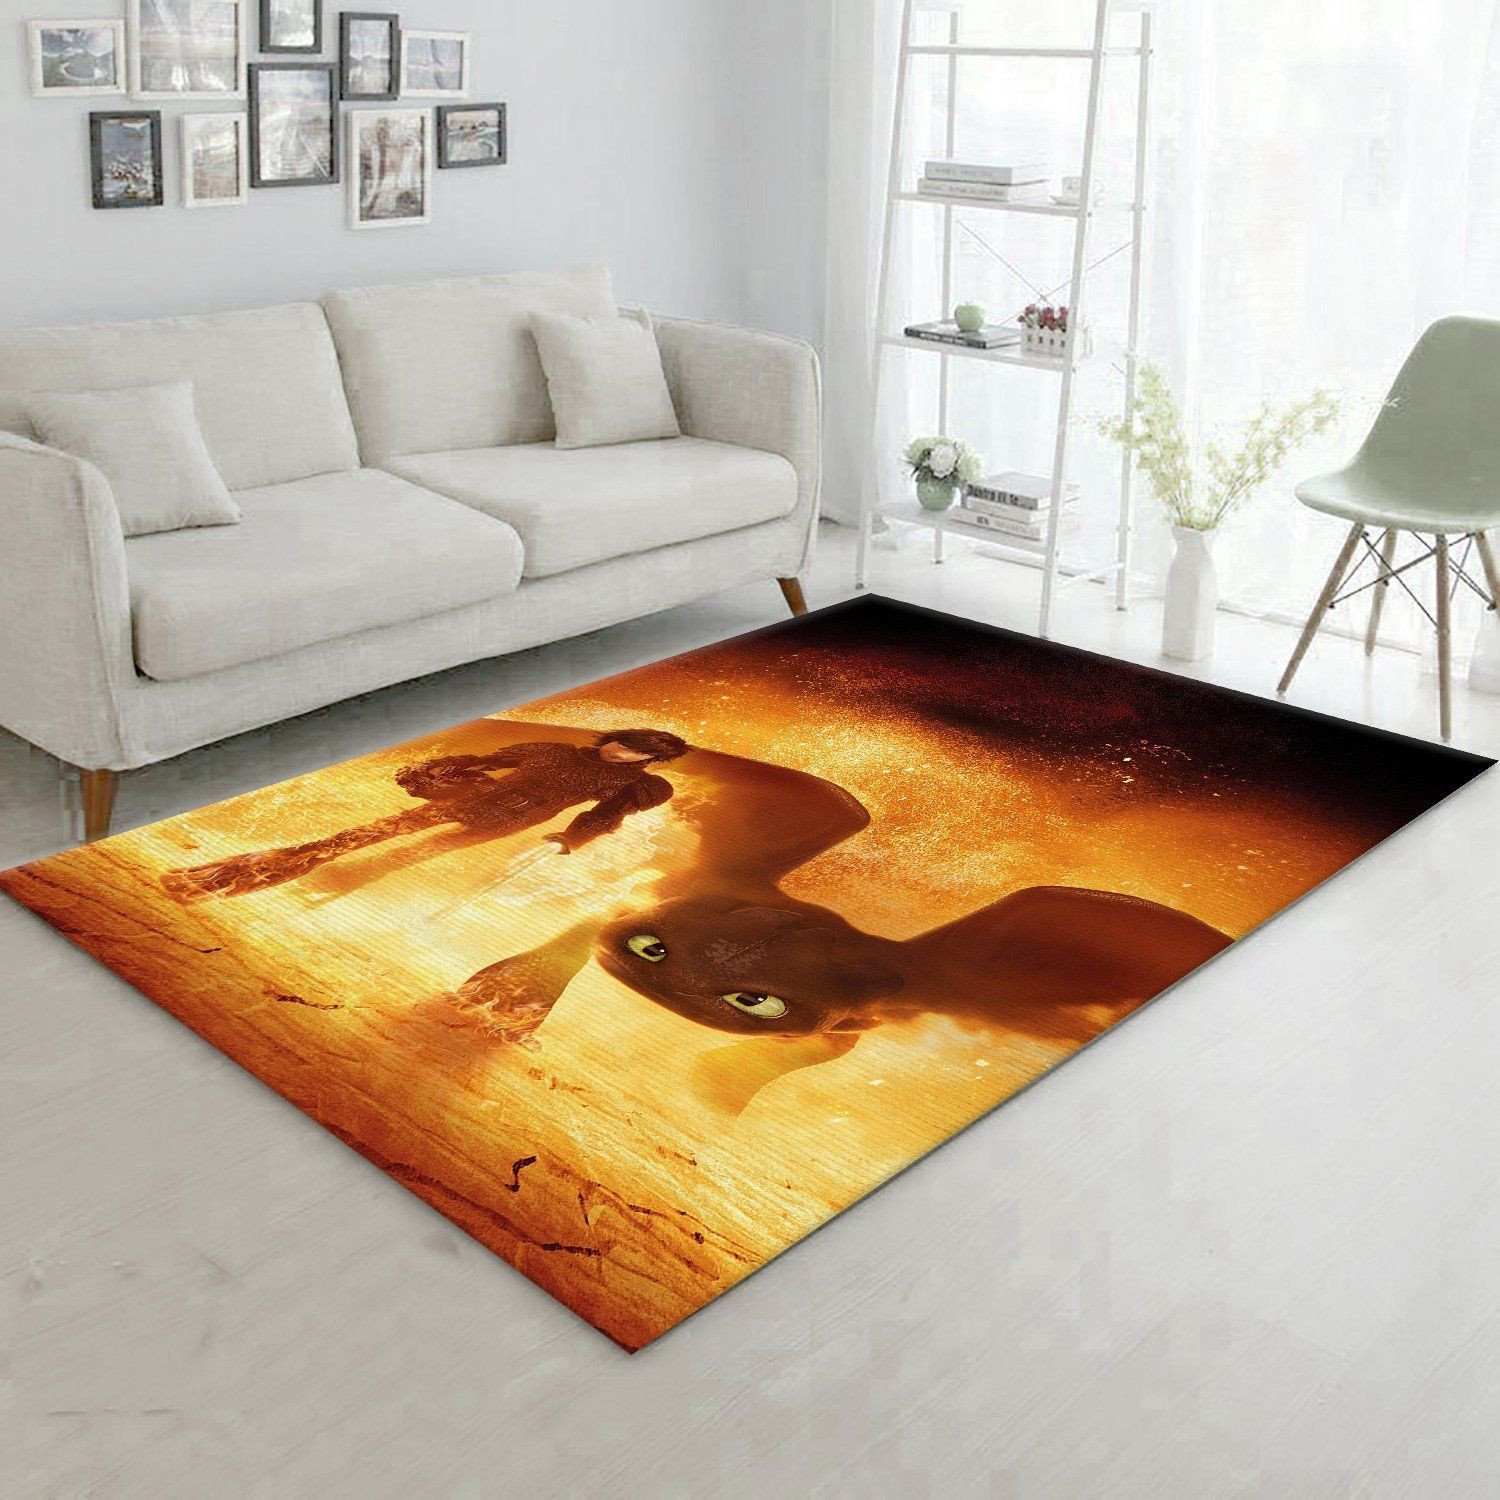 HICCUP AND TOOTHLESS Area Rug Carpet Floor Decor 180222